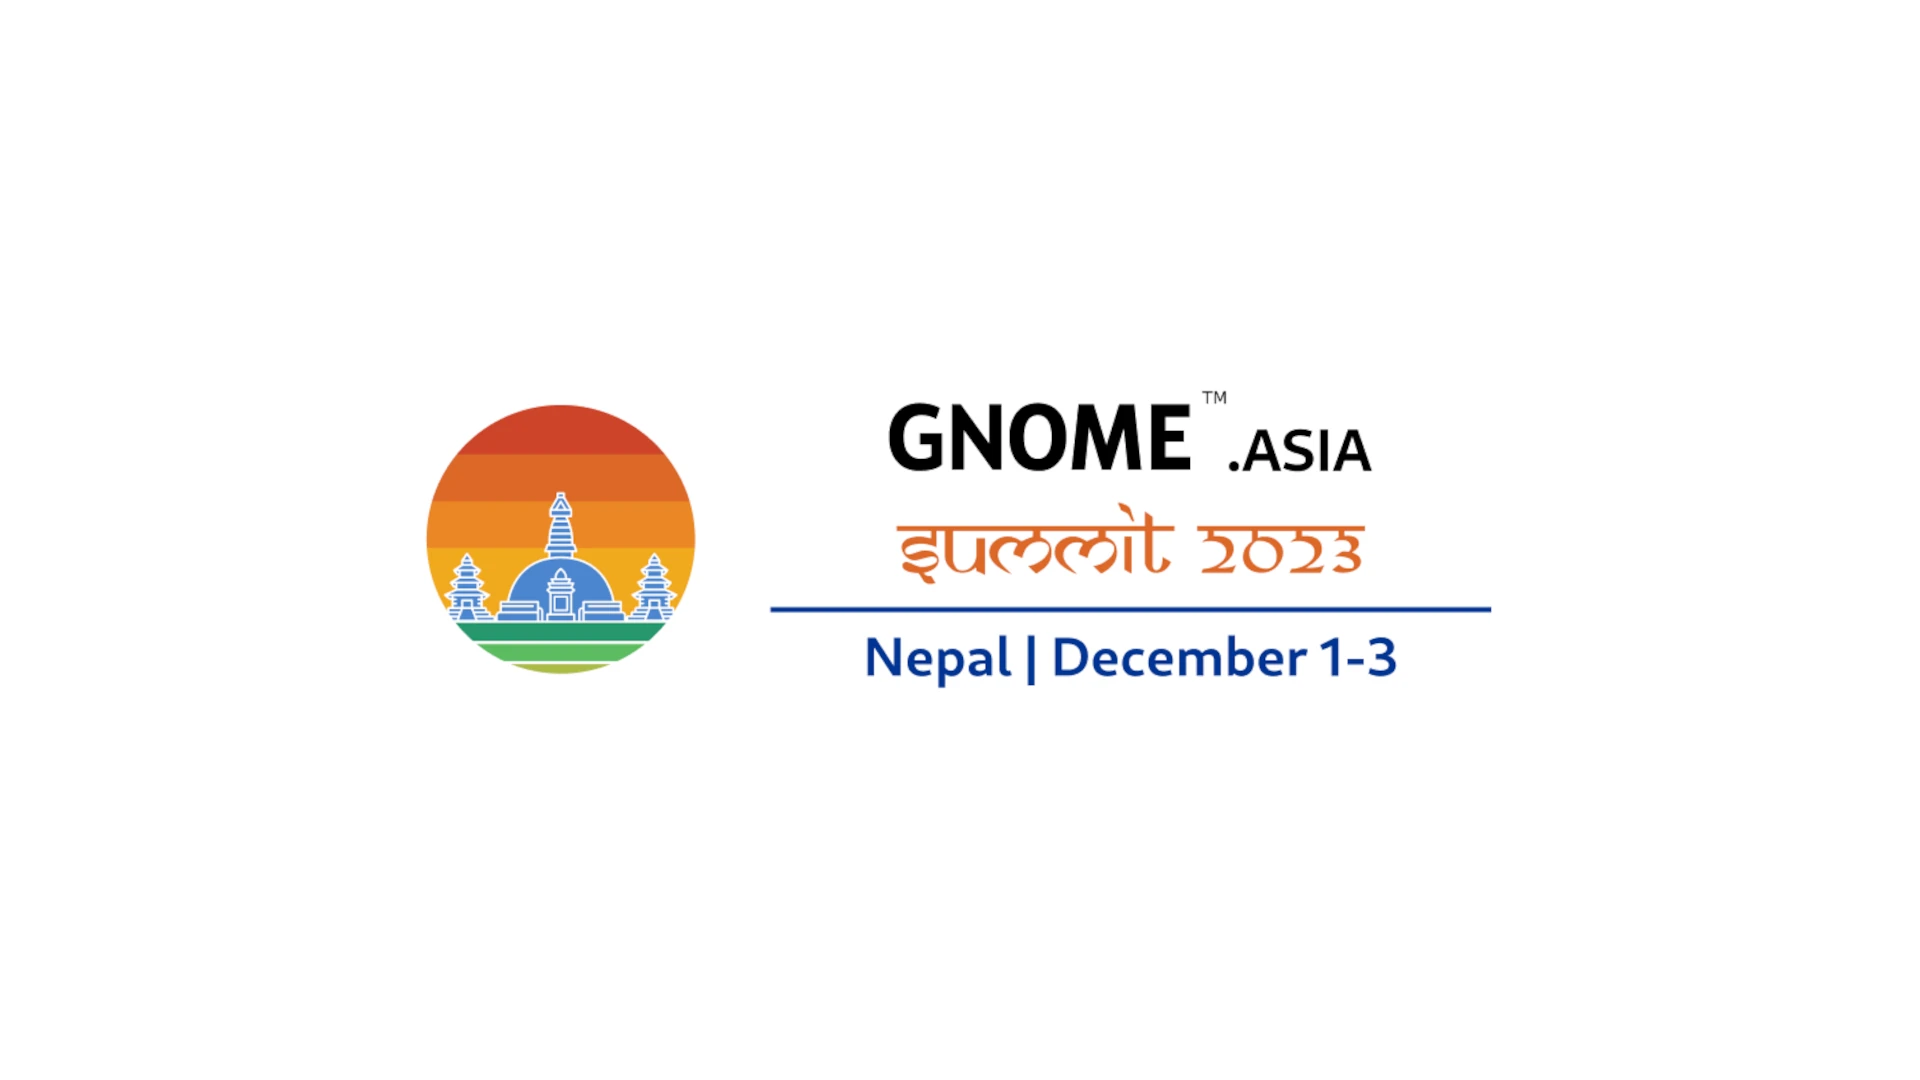 GNOME.Asia 2023 Will Take Place in Kathmandu for the GNOME 46 Desktop